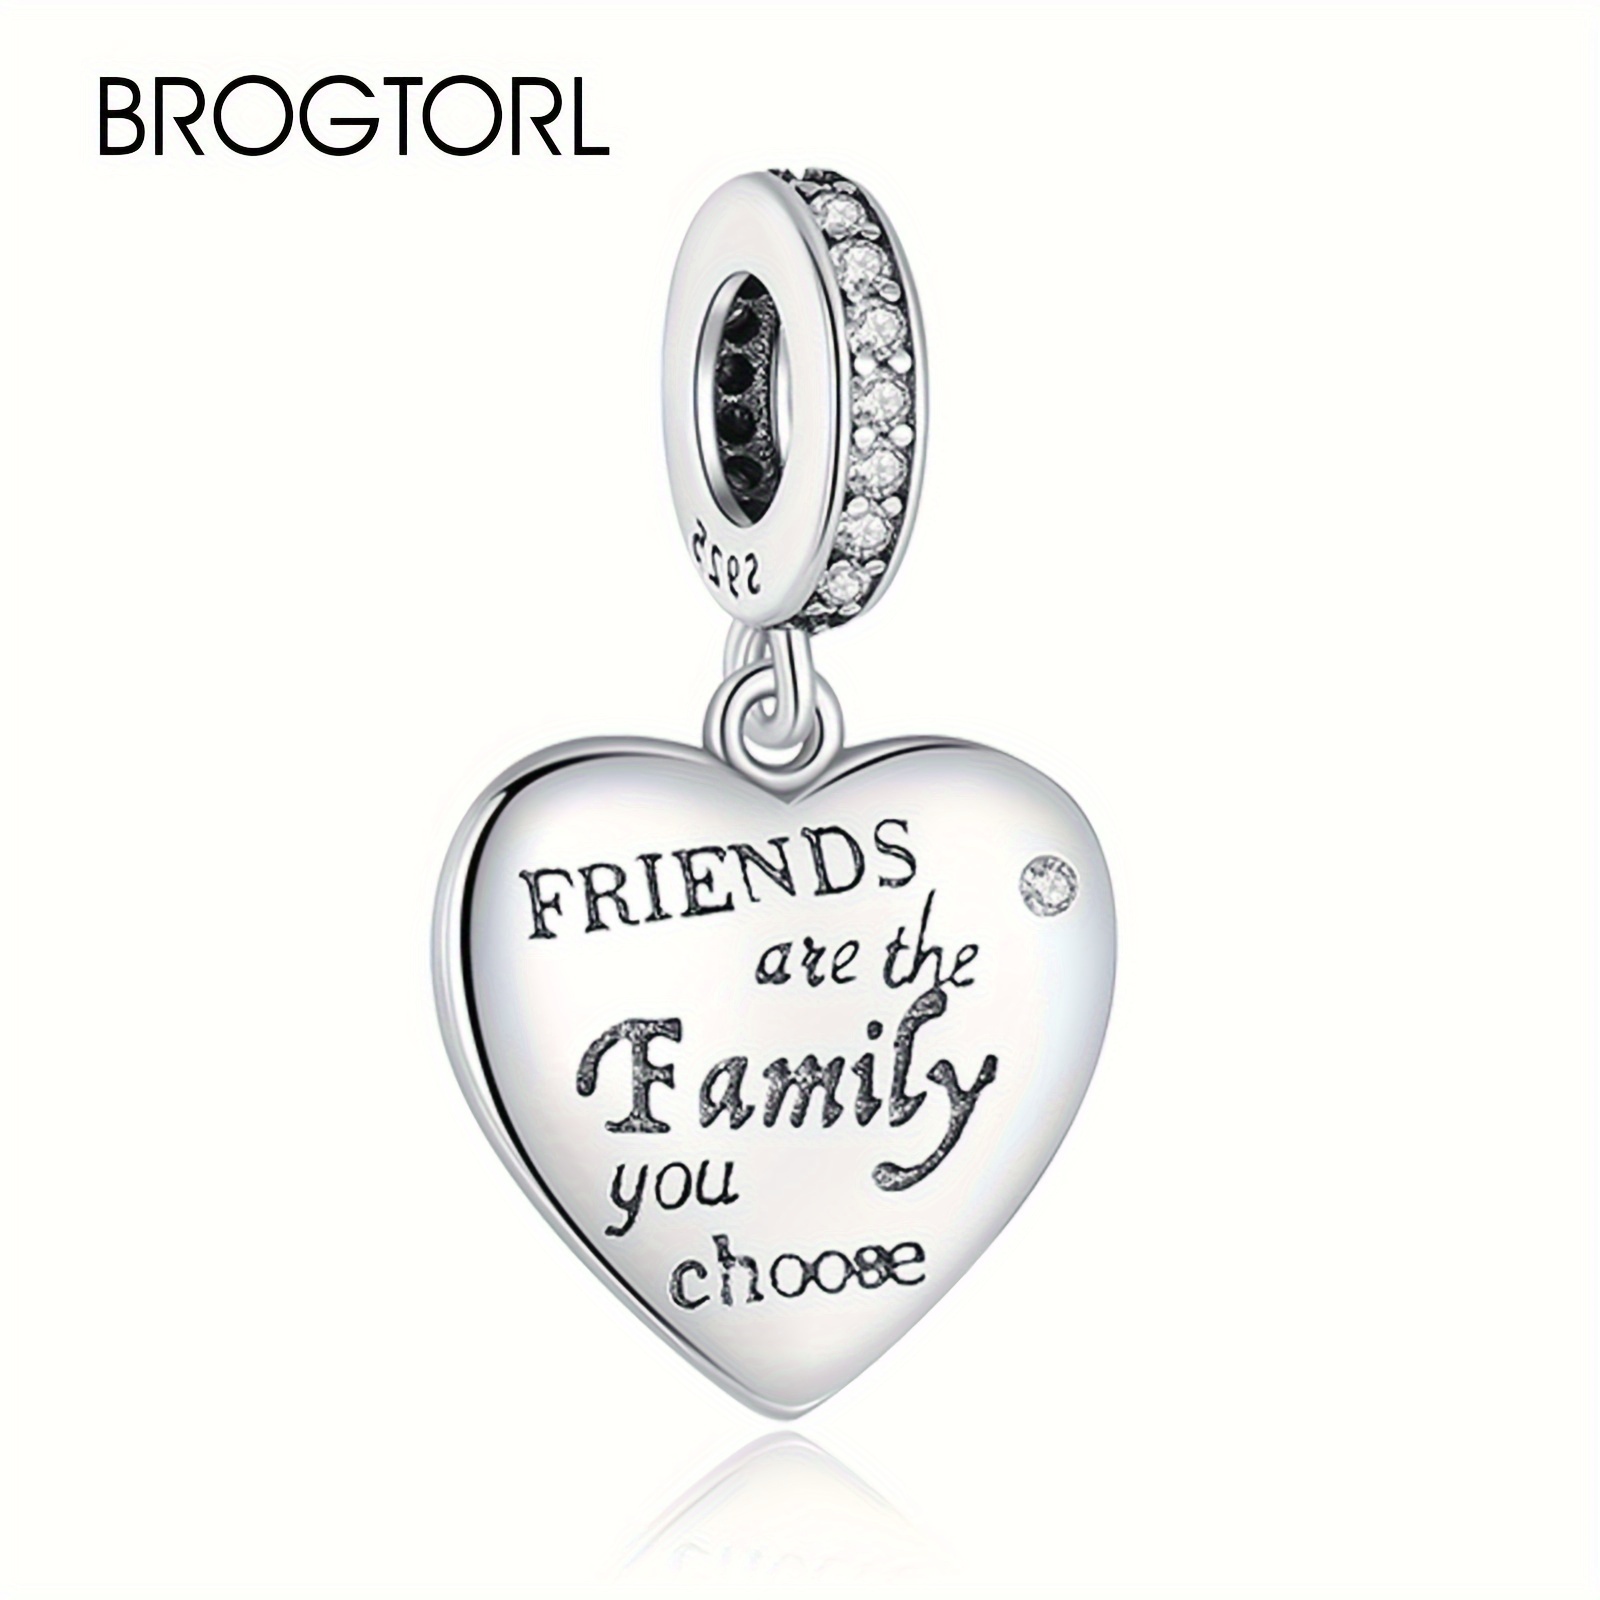 

Women's 925 Sterling Silver Diy Charm For Bracelet & Necklace Friends Are Family Heart Dangle Charm Cz Stone Fashion Diy Jewelry Making Pendant